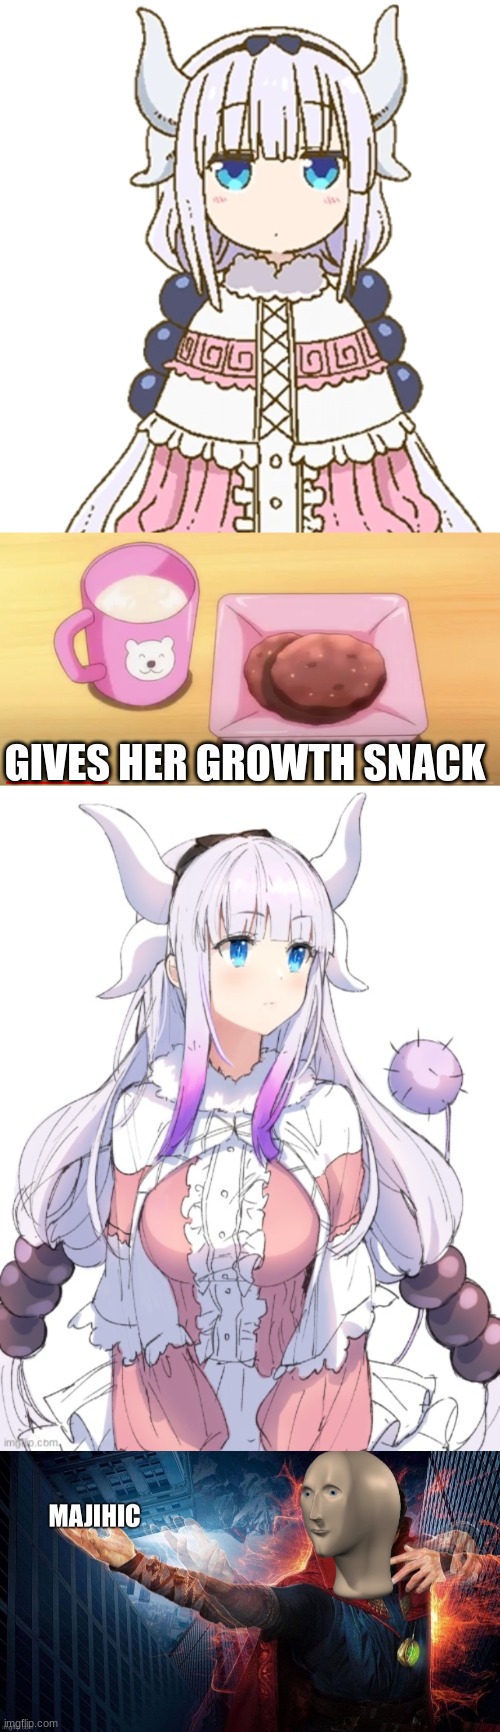 Power of Growth Snack | GIVES HER GROWTH SNACK | image tagged in magic,loli | made w/ Imgflip meme maker